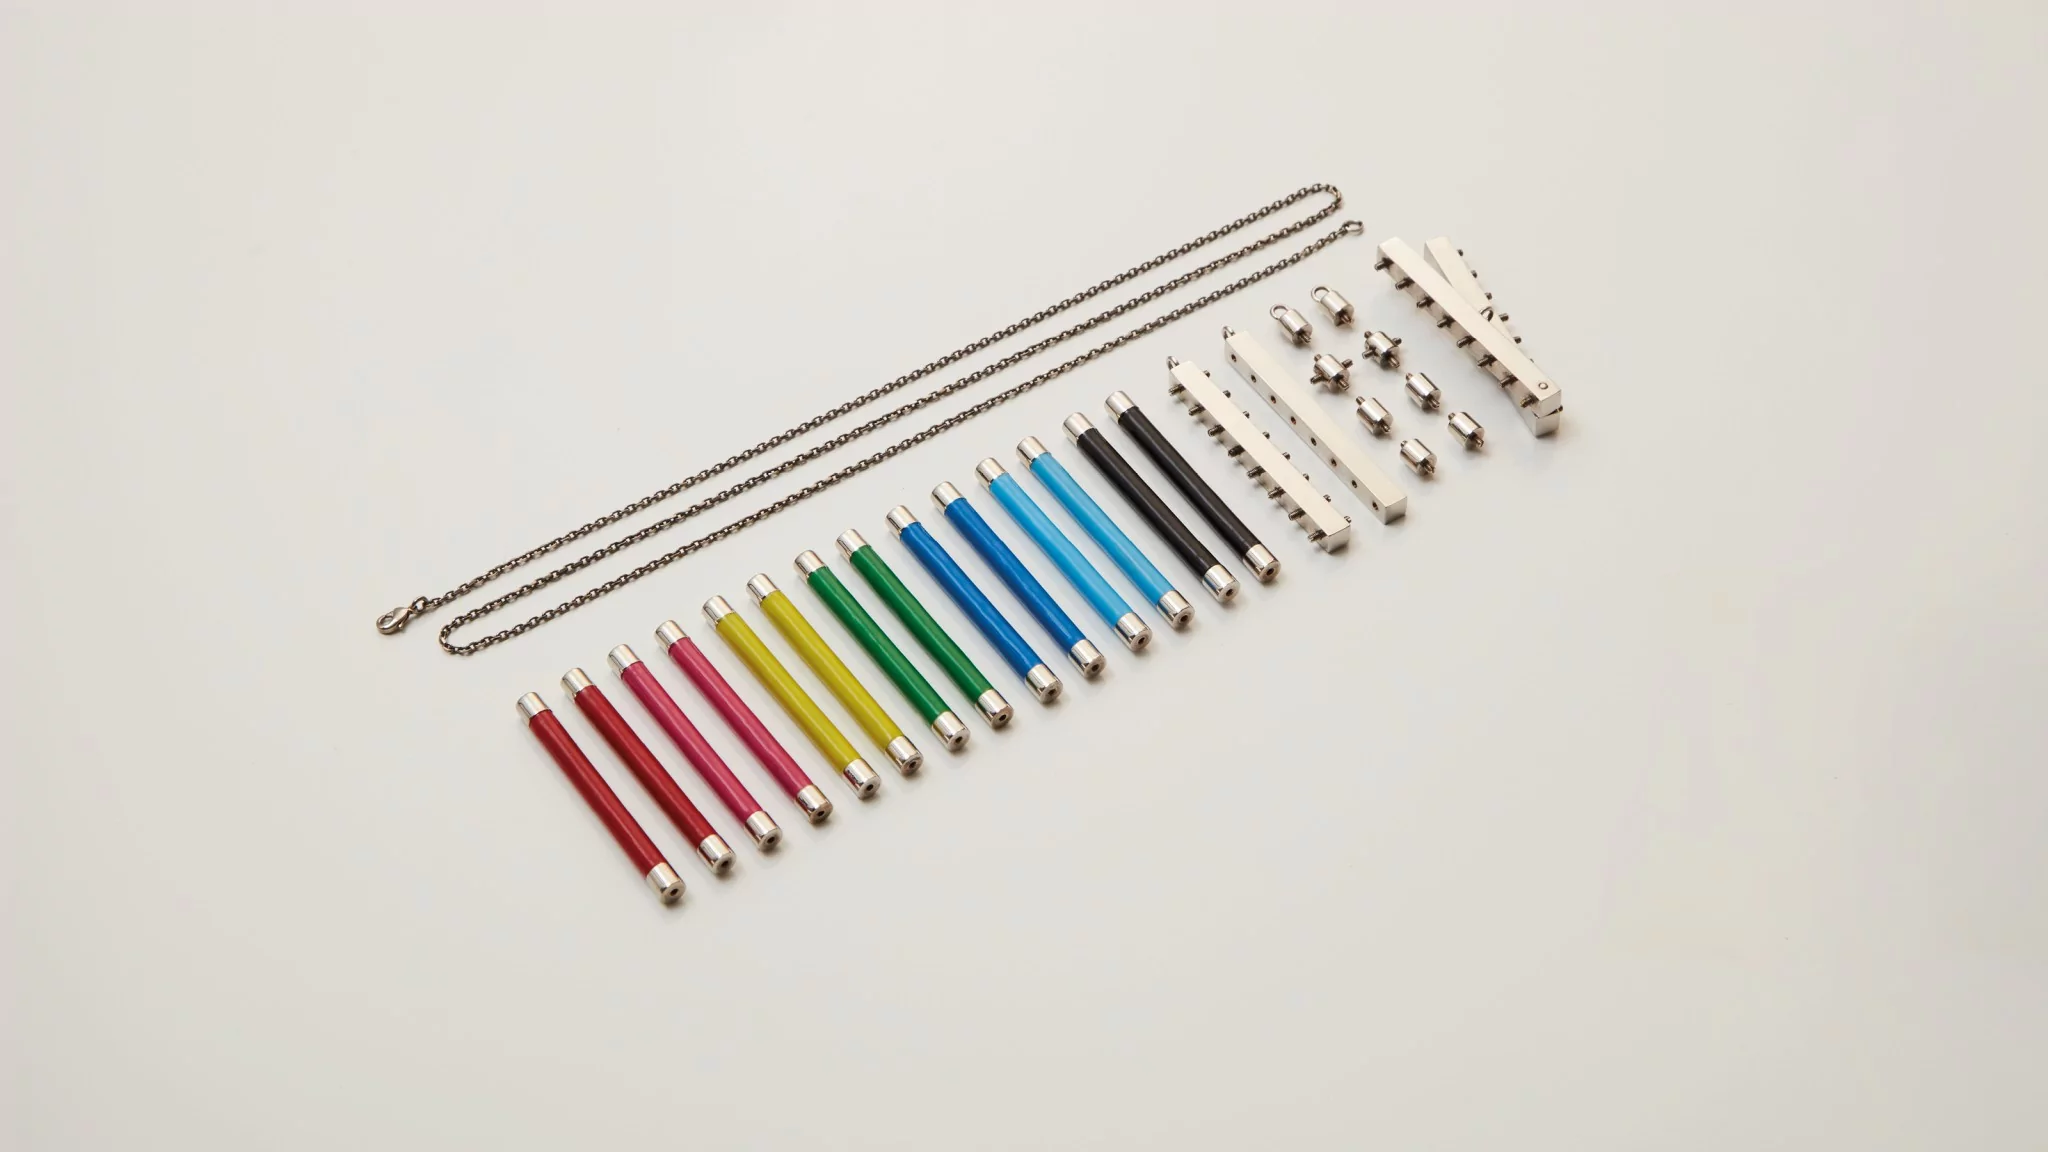 Rukpong and Goossens developed a kit of elements that is interchangeable. Brass palladium finish and decorated with colour enamel and different types of joint units that can be connected in various ways.